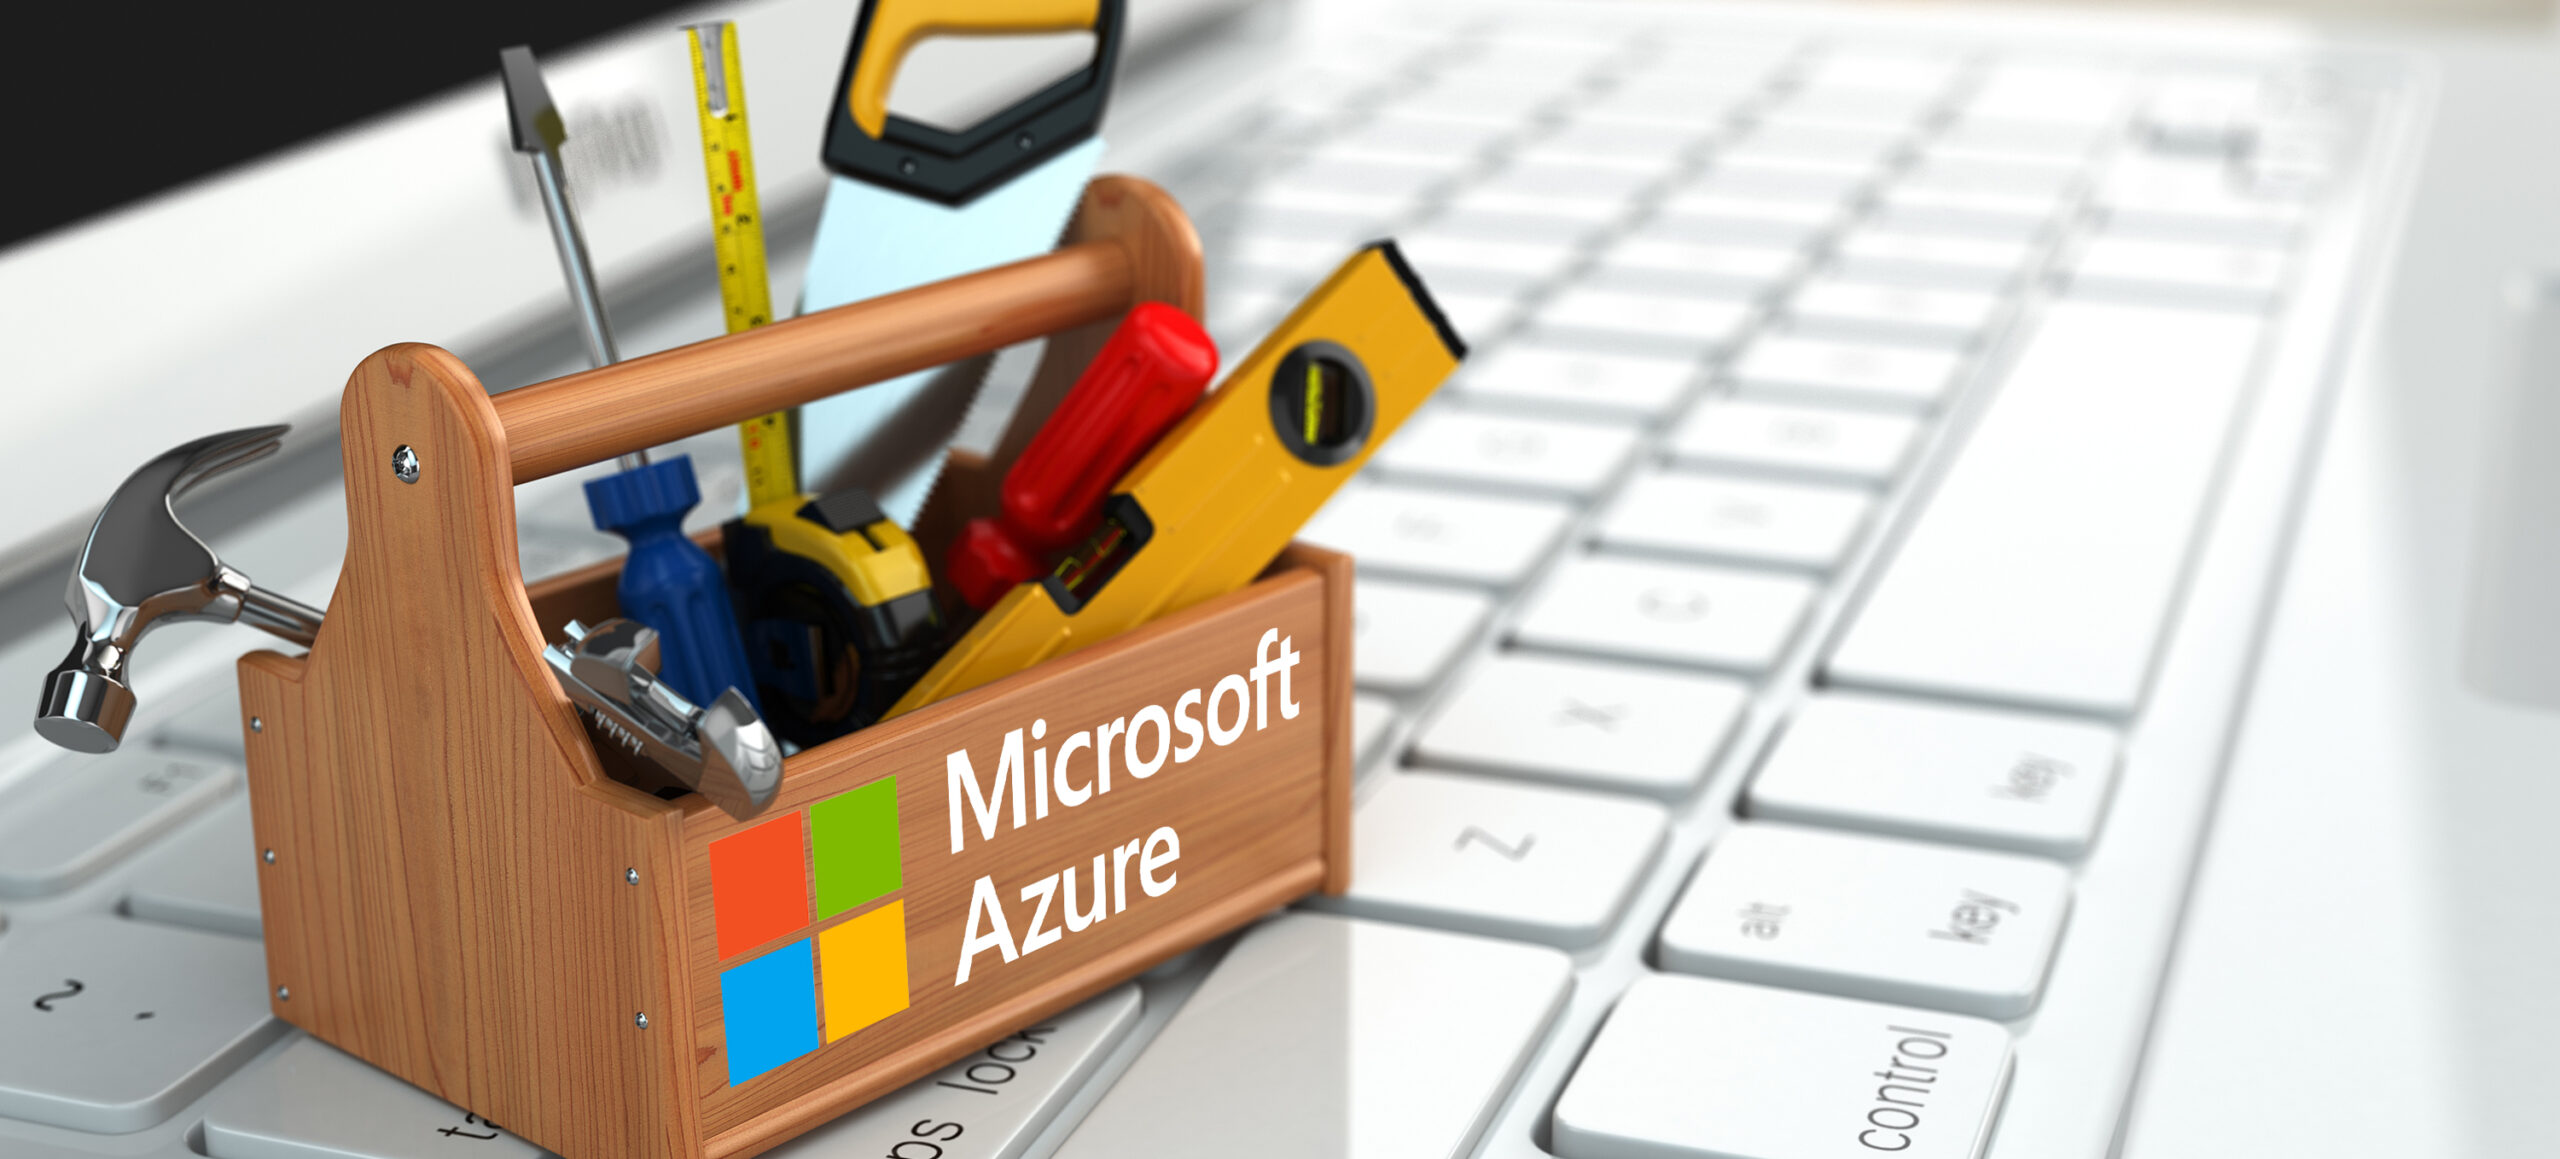 Microsoft Azure, a powerful toolbox for security and compliance